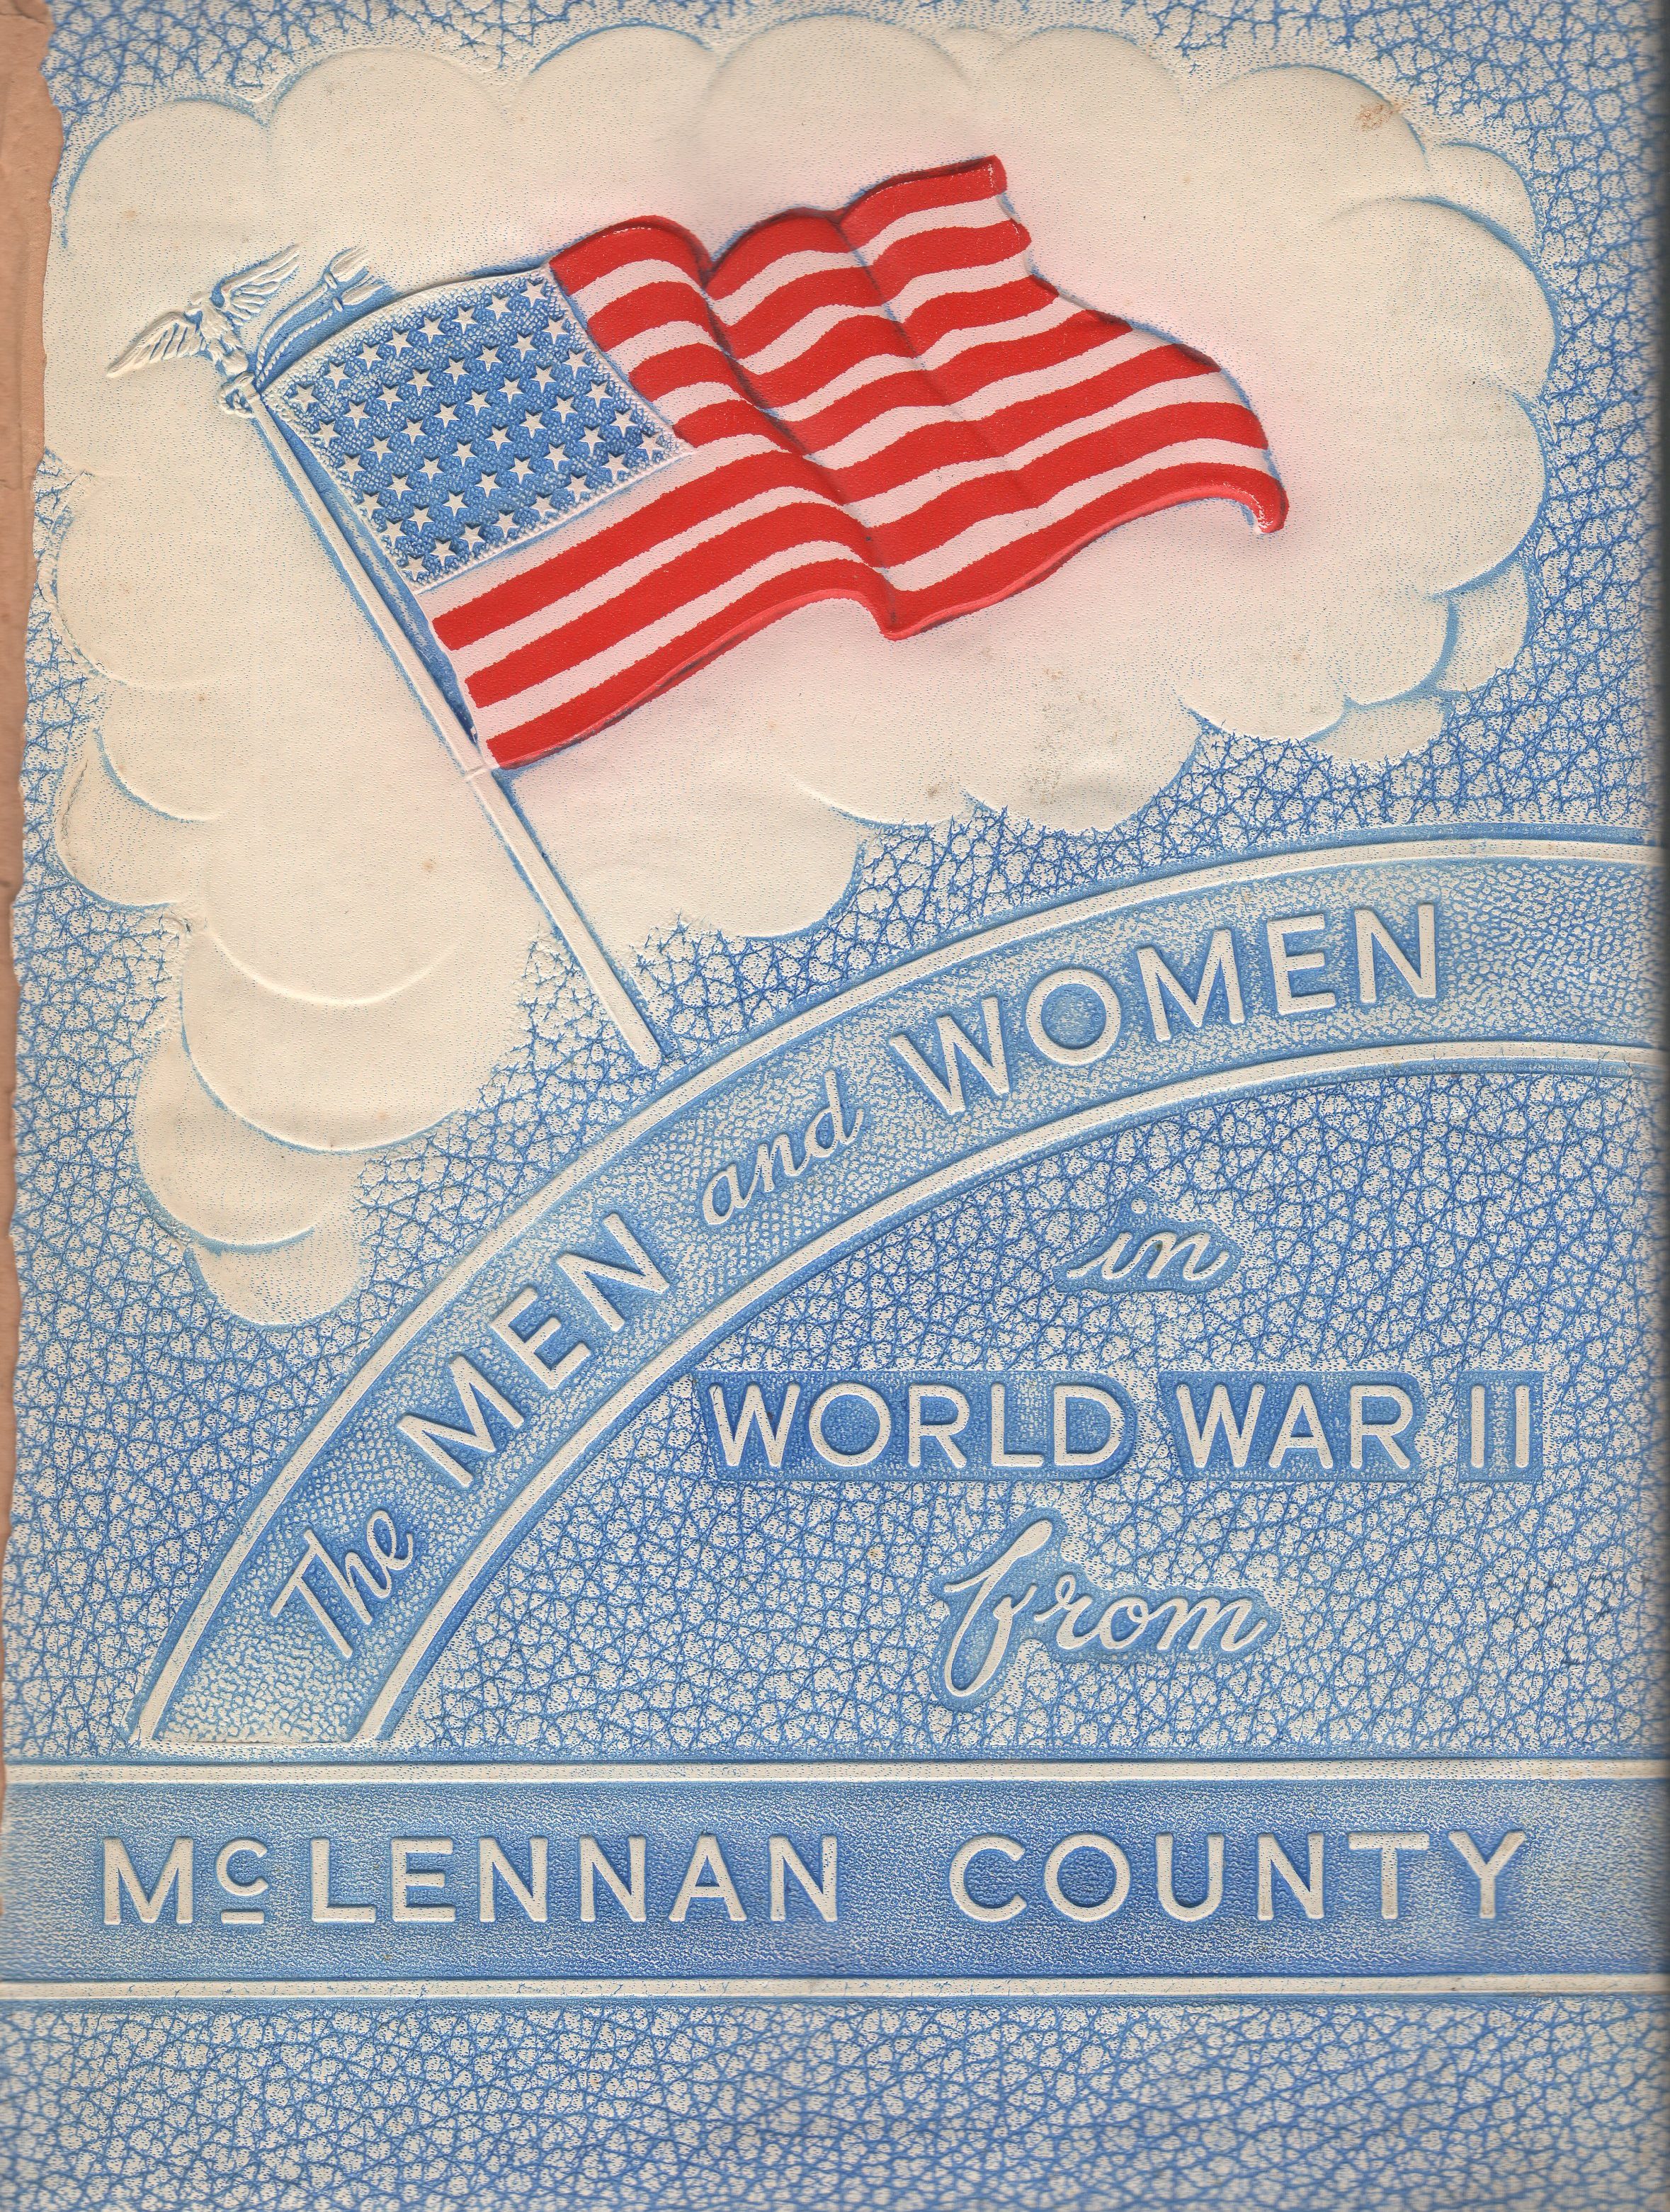 Men and women in the Armed Forces from McLennan County Texas